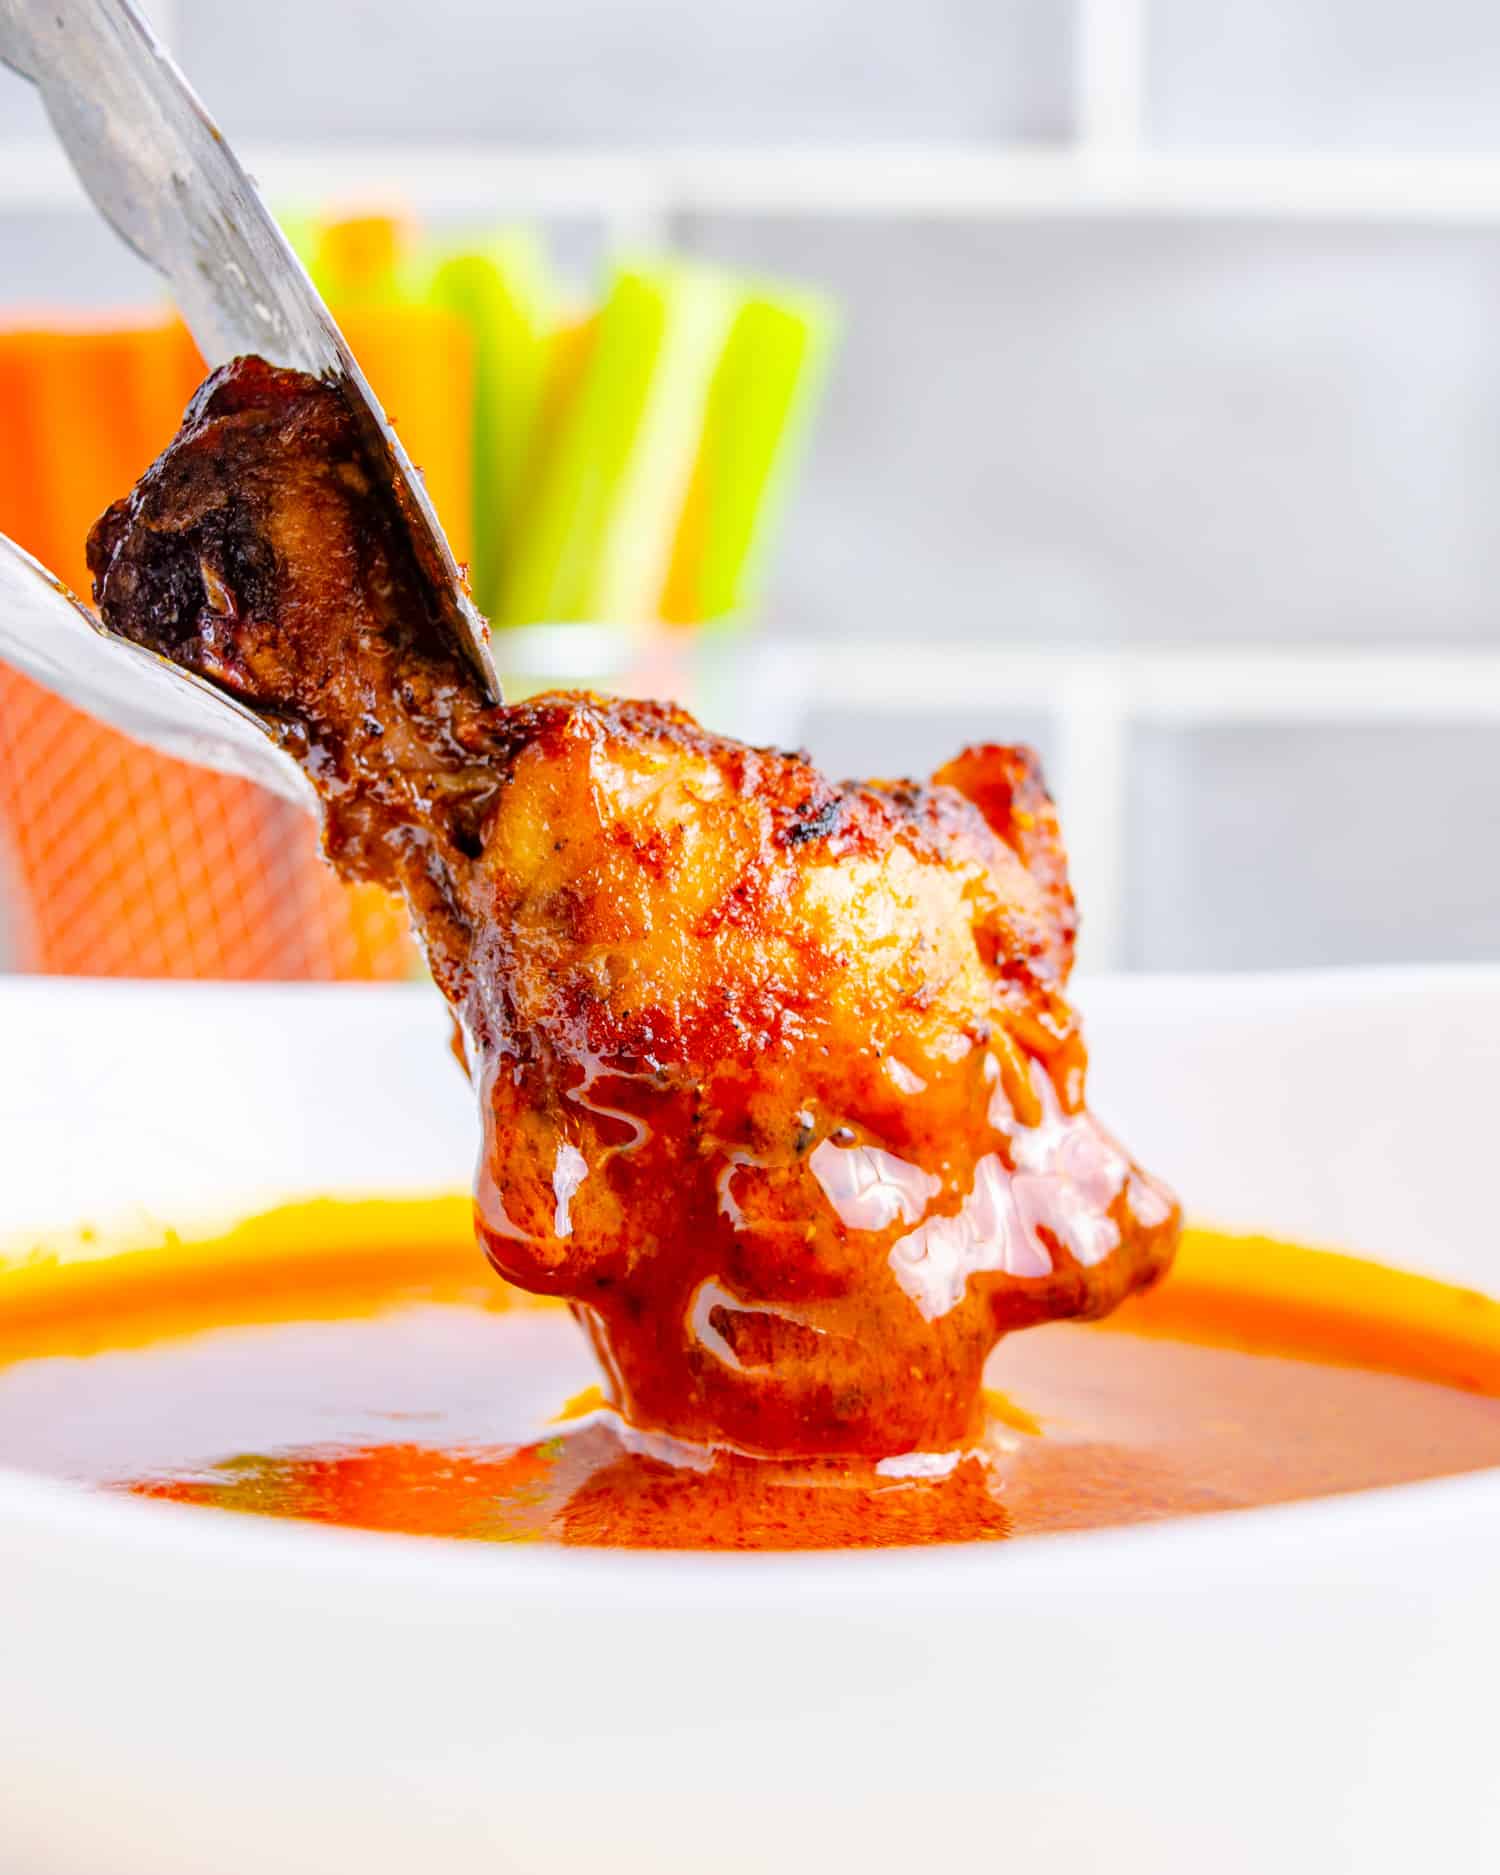 Dirty keto chicken wing being dipped into buffalo sauce.